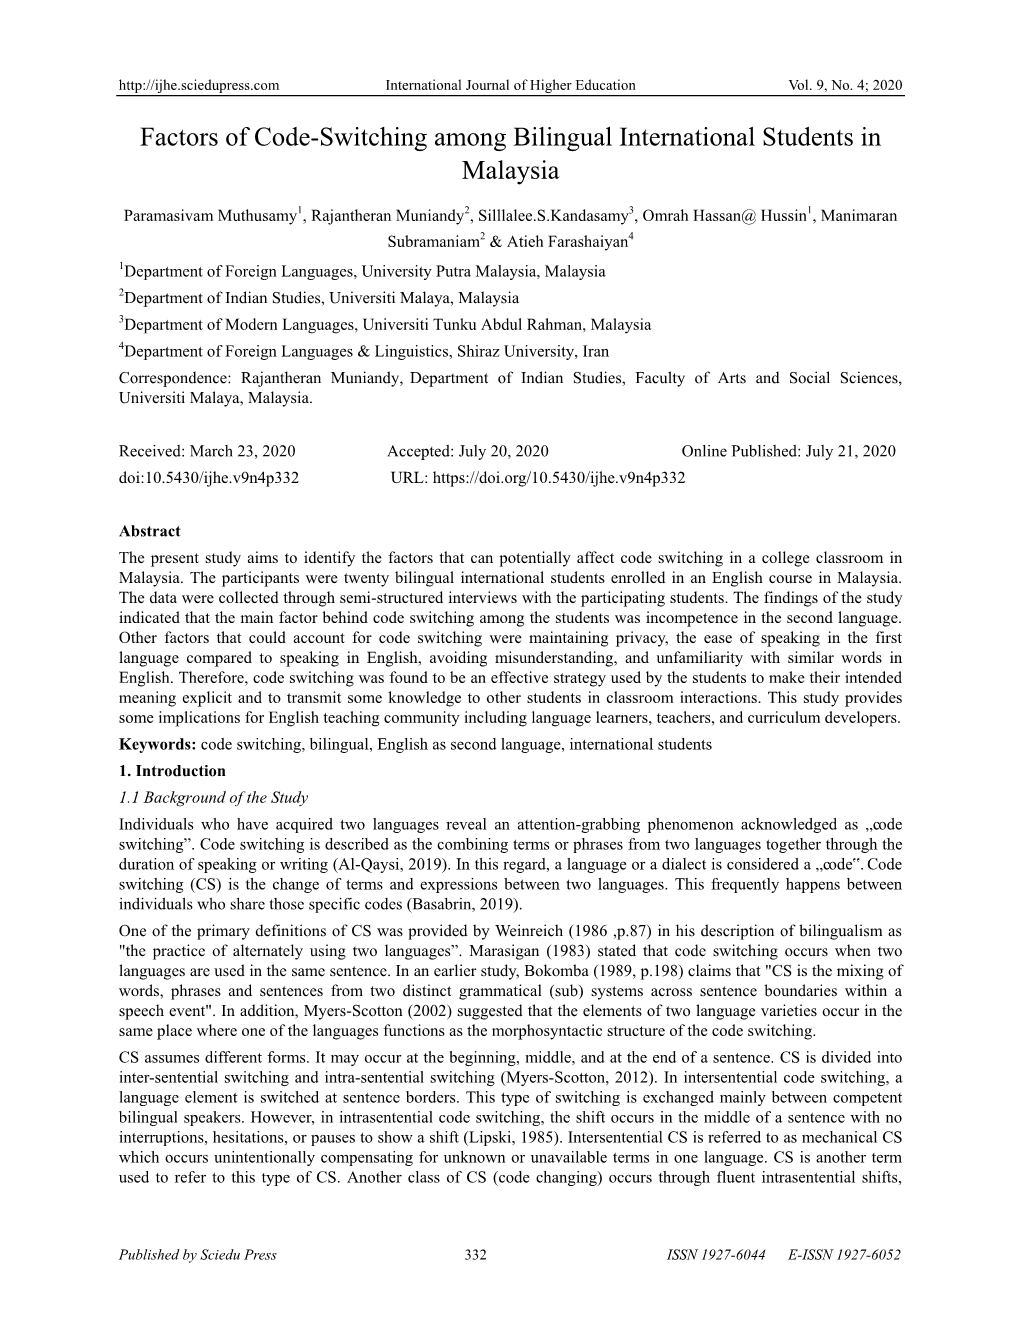 Factors of Code-Switching Among Bilingual International Students in Malaysia